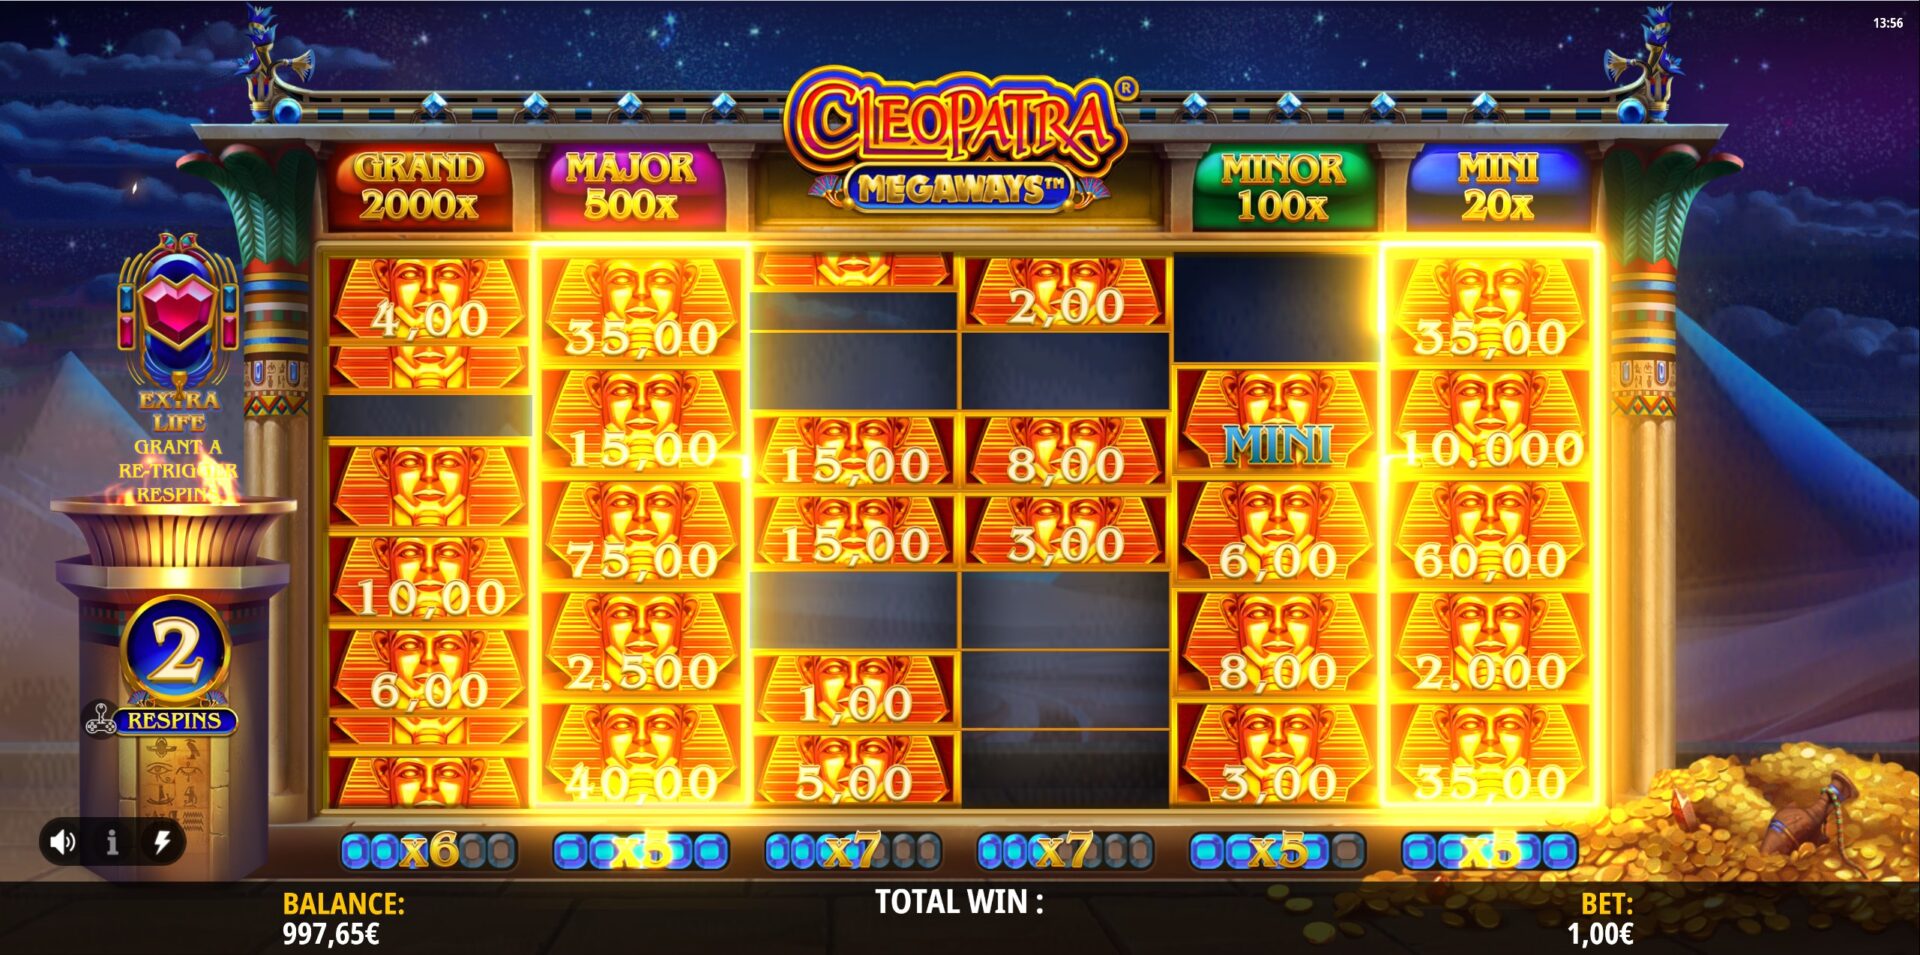 Cleopatra Megaways Slot - Hold & Win Feature